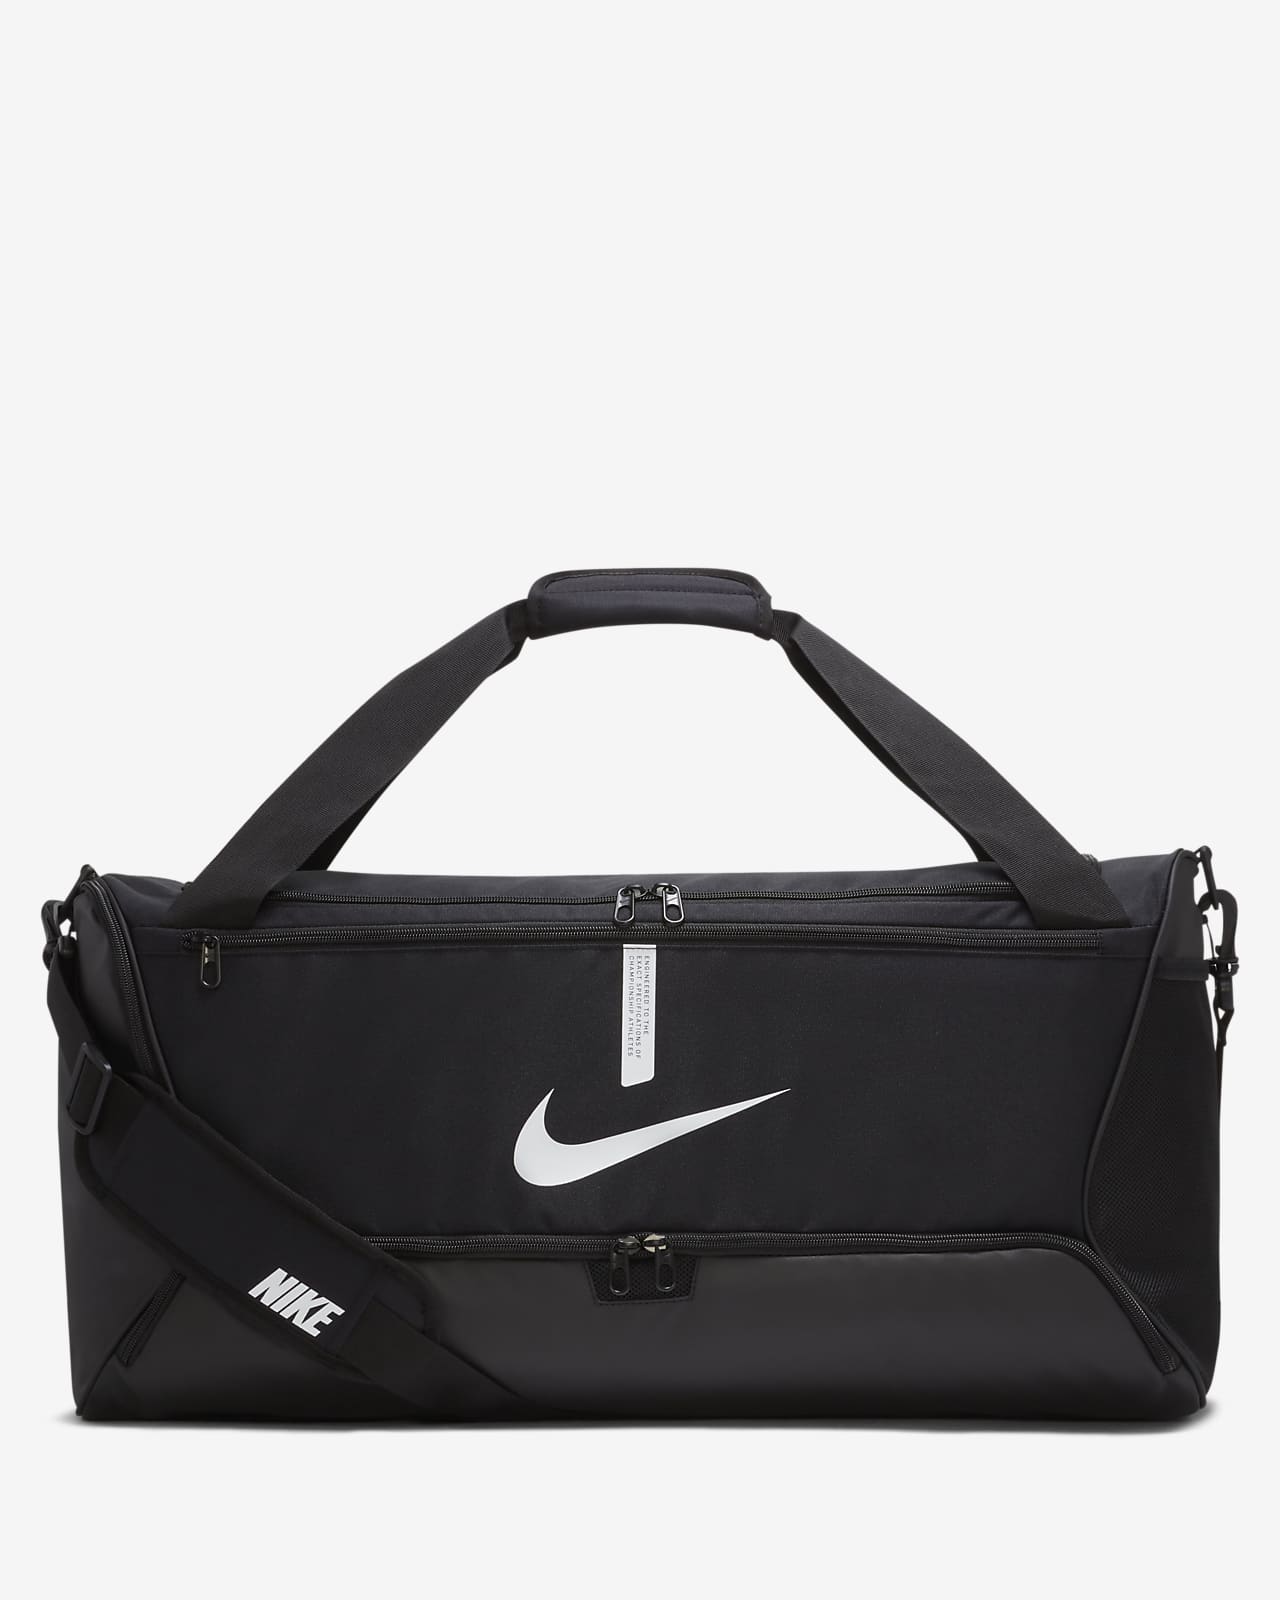 have a nike day bag